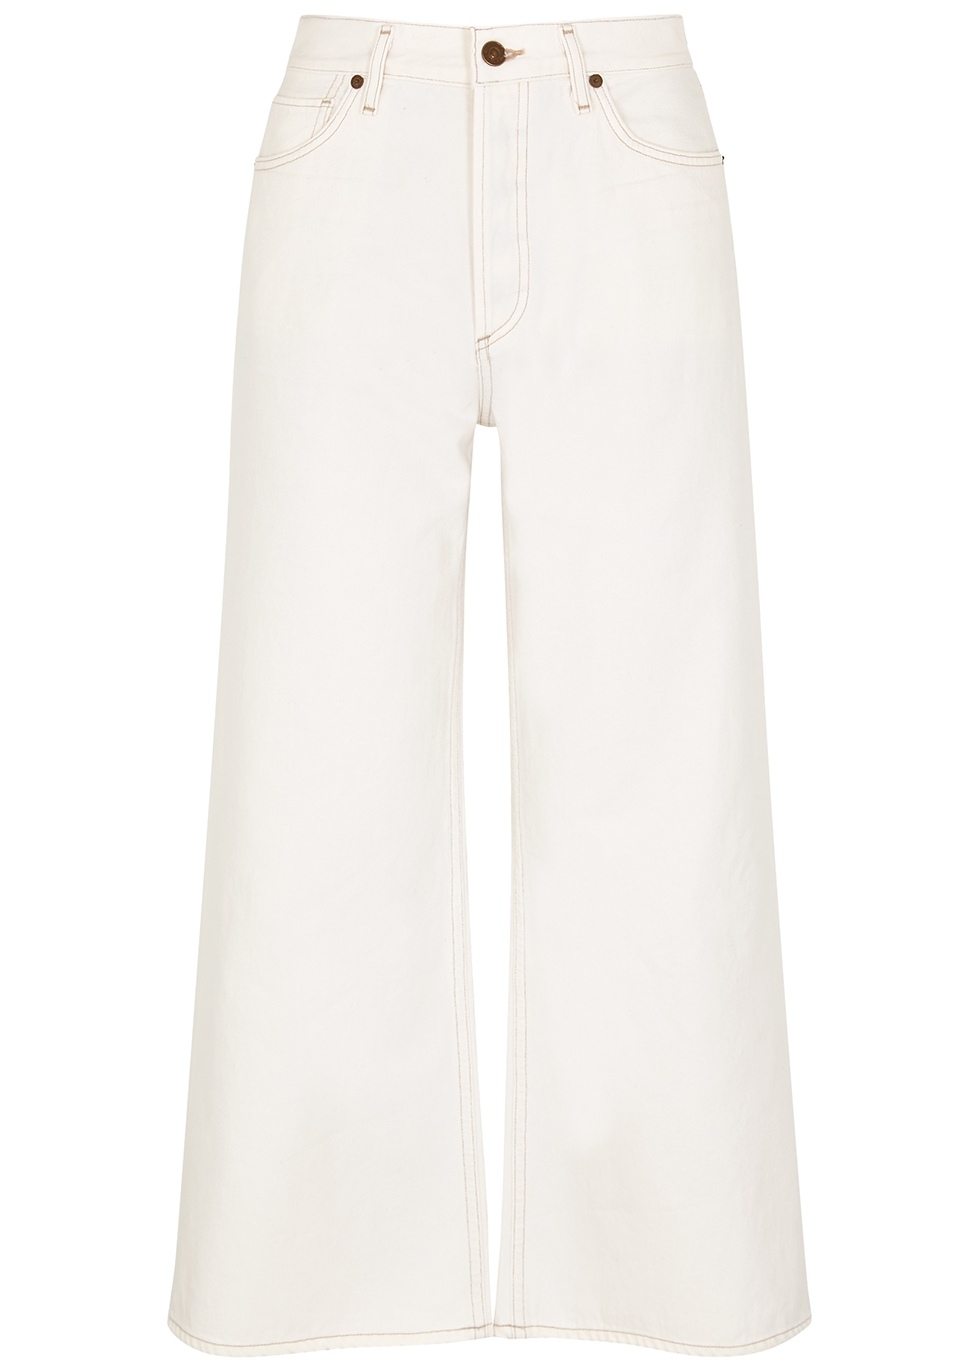 citizens of humanity white flare jeans